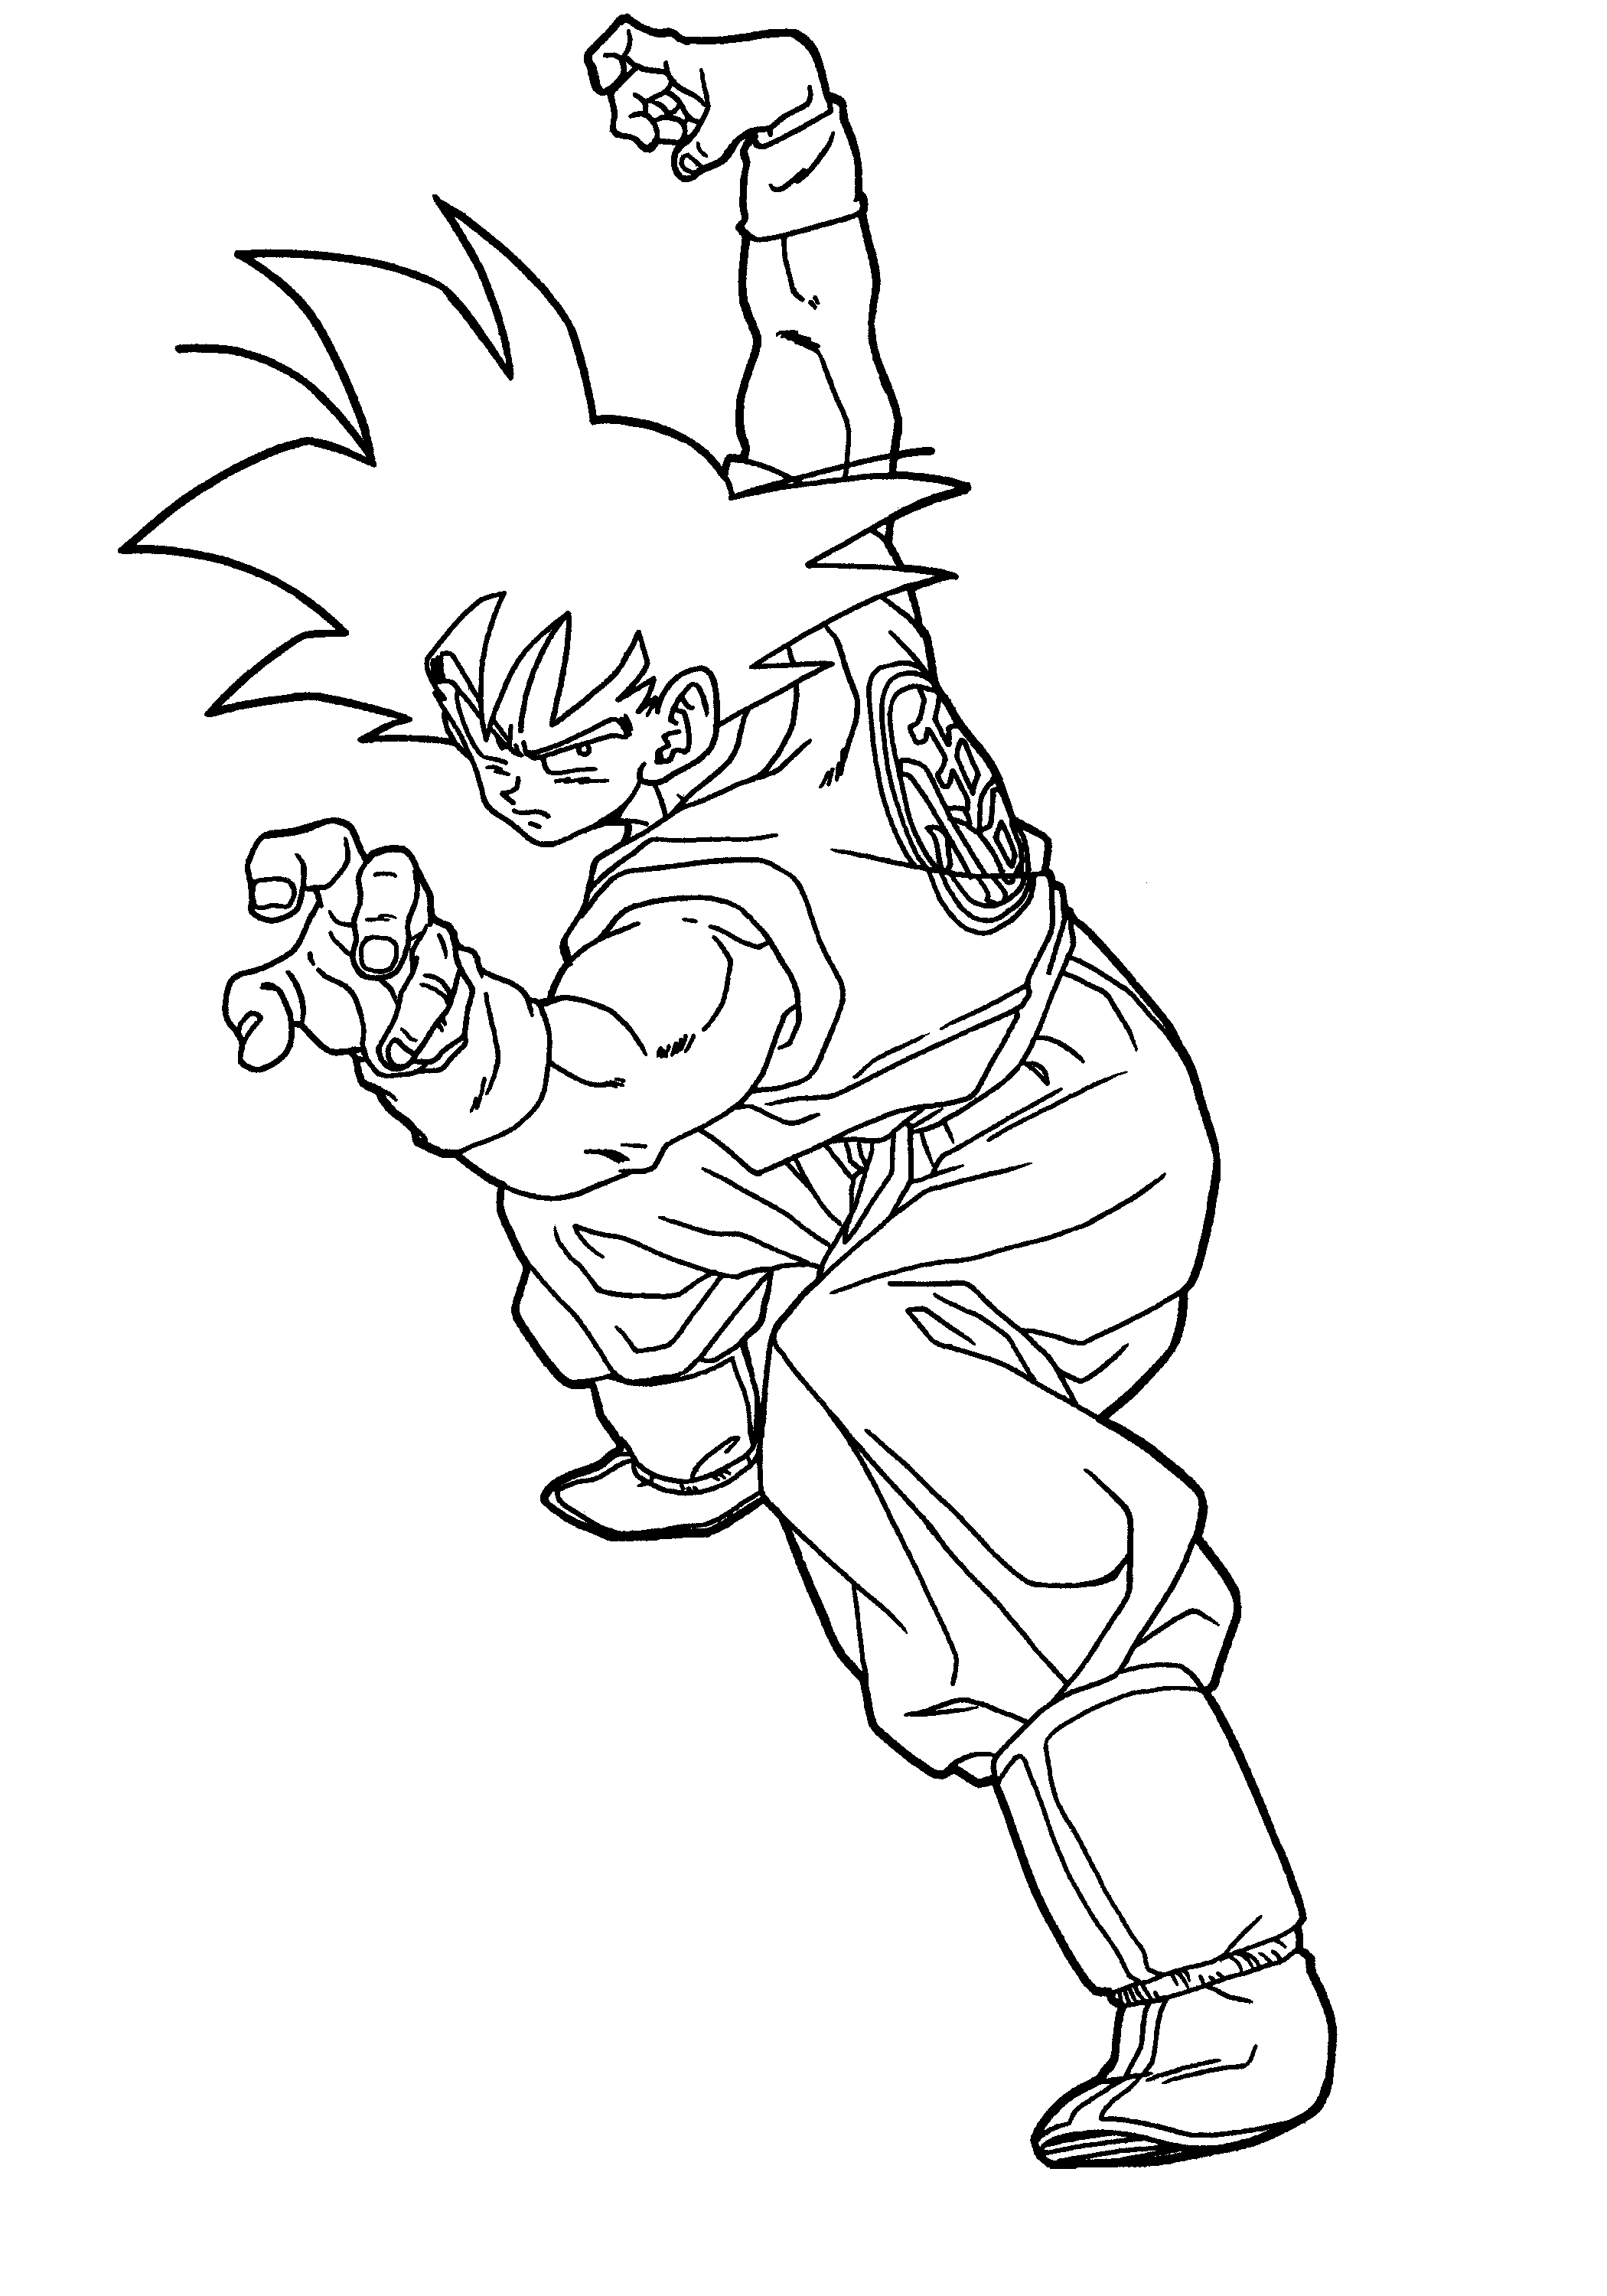 dbz colouring pages free printable dragon ball z coloring pages for kids pages colouring dbz 